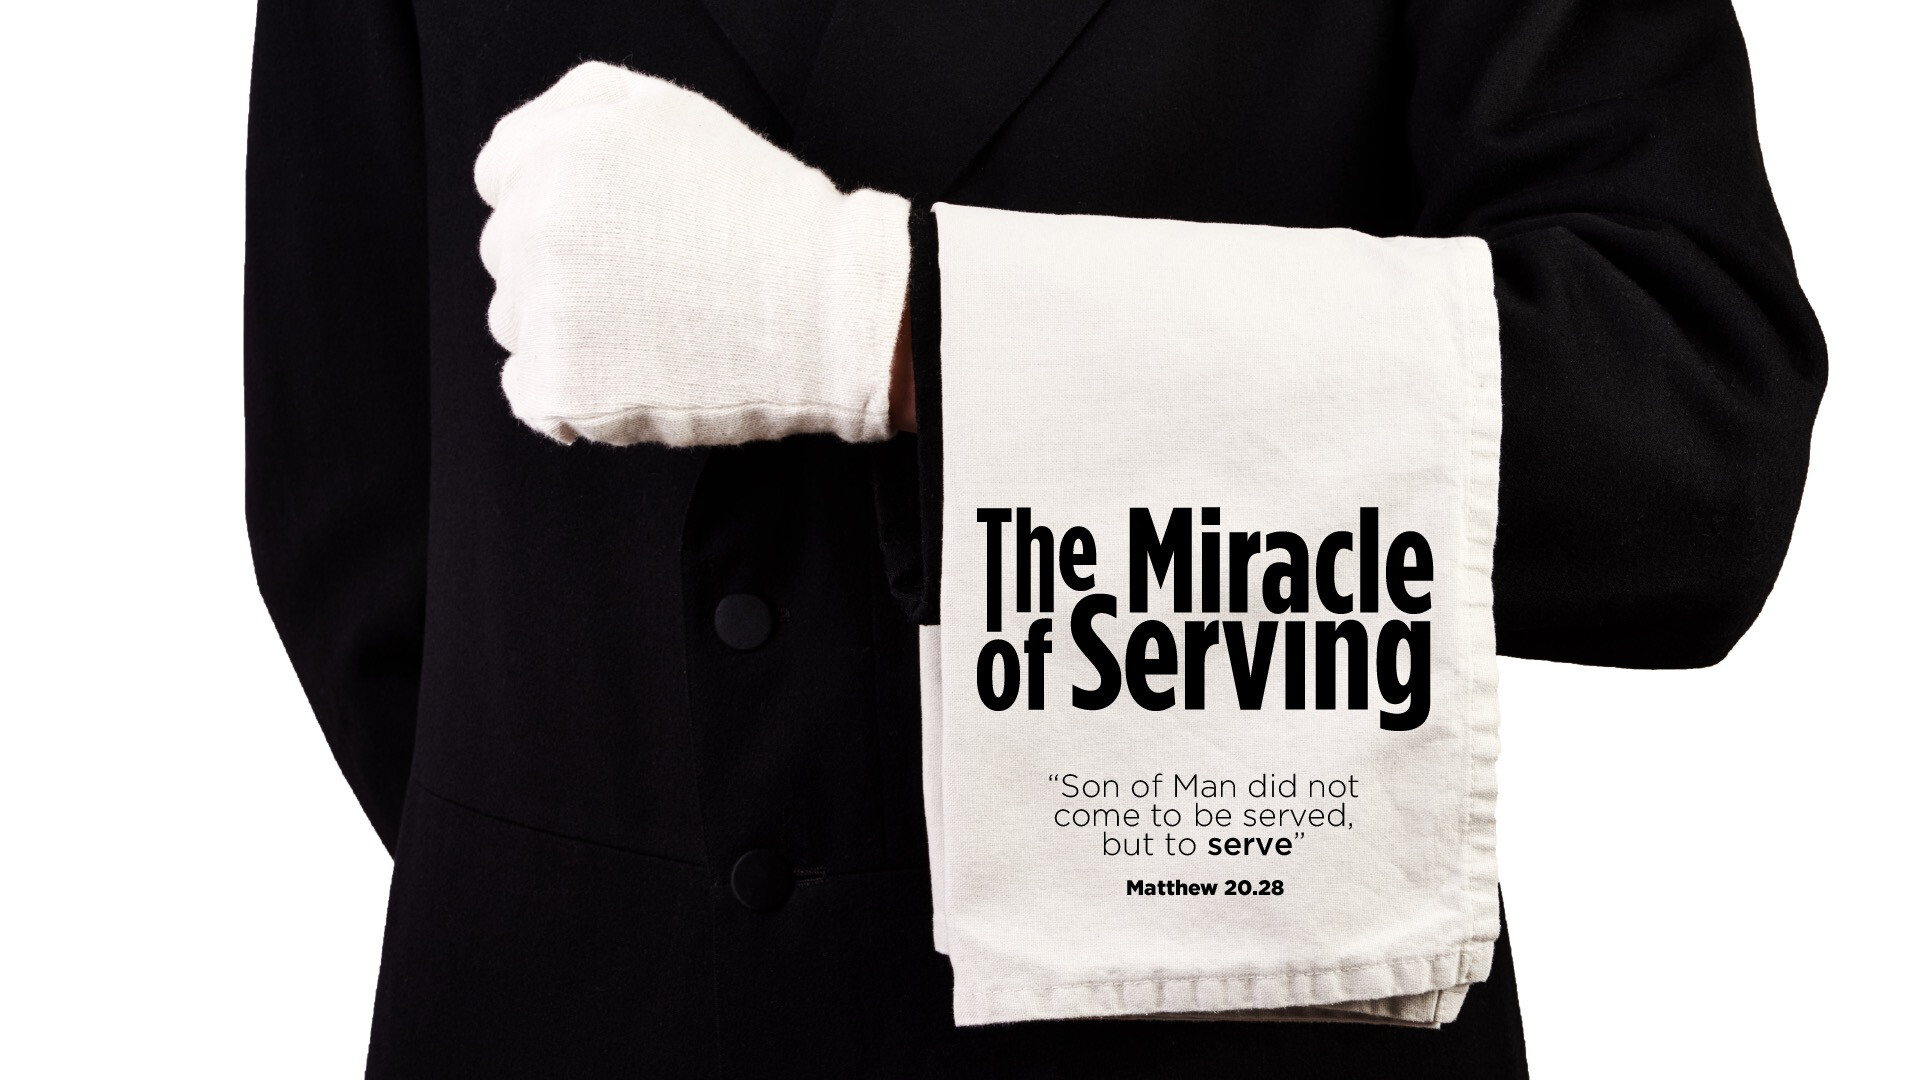 Sunday message: Serving is our highest calling